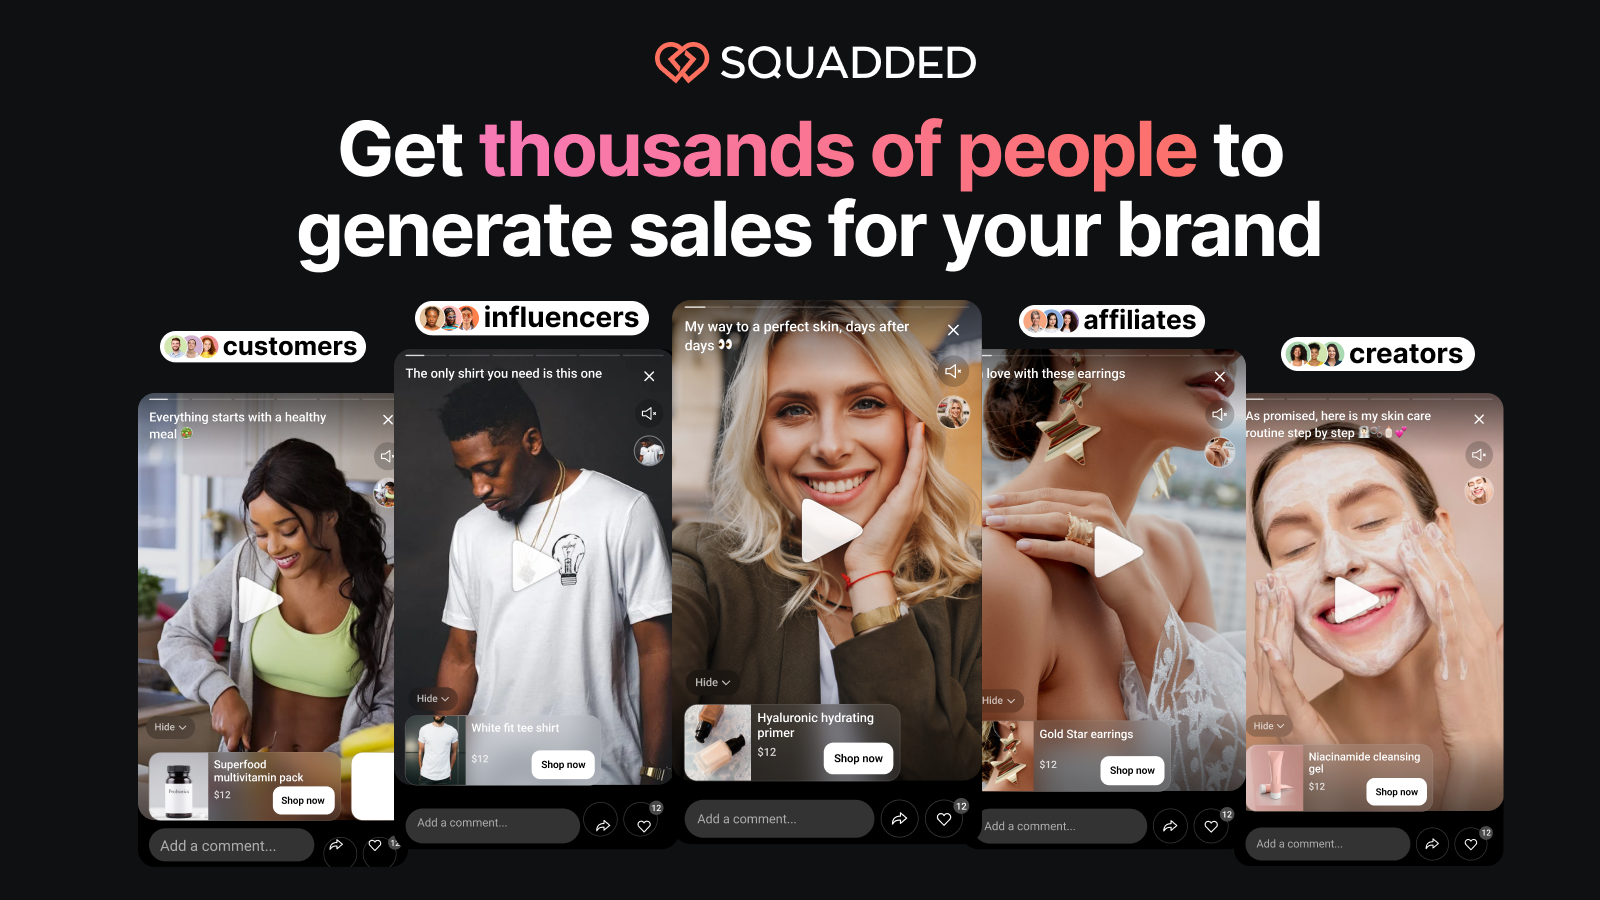 Get thousands of people to generate sales for your brand